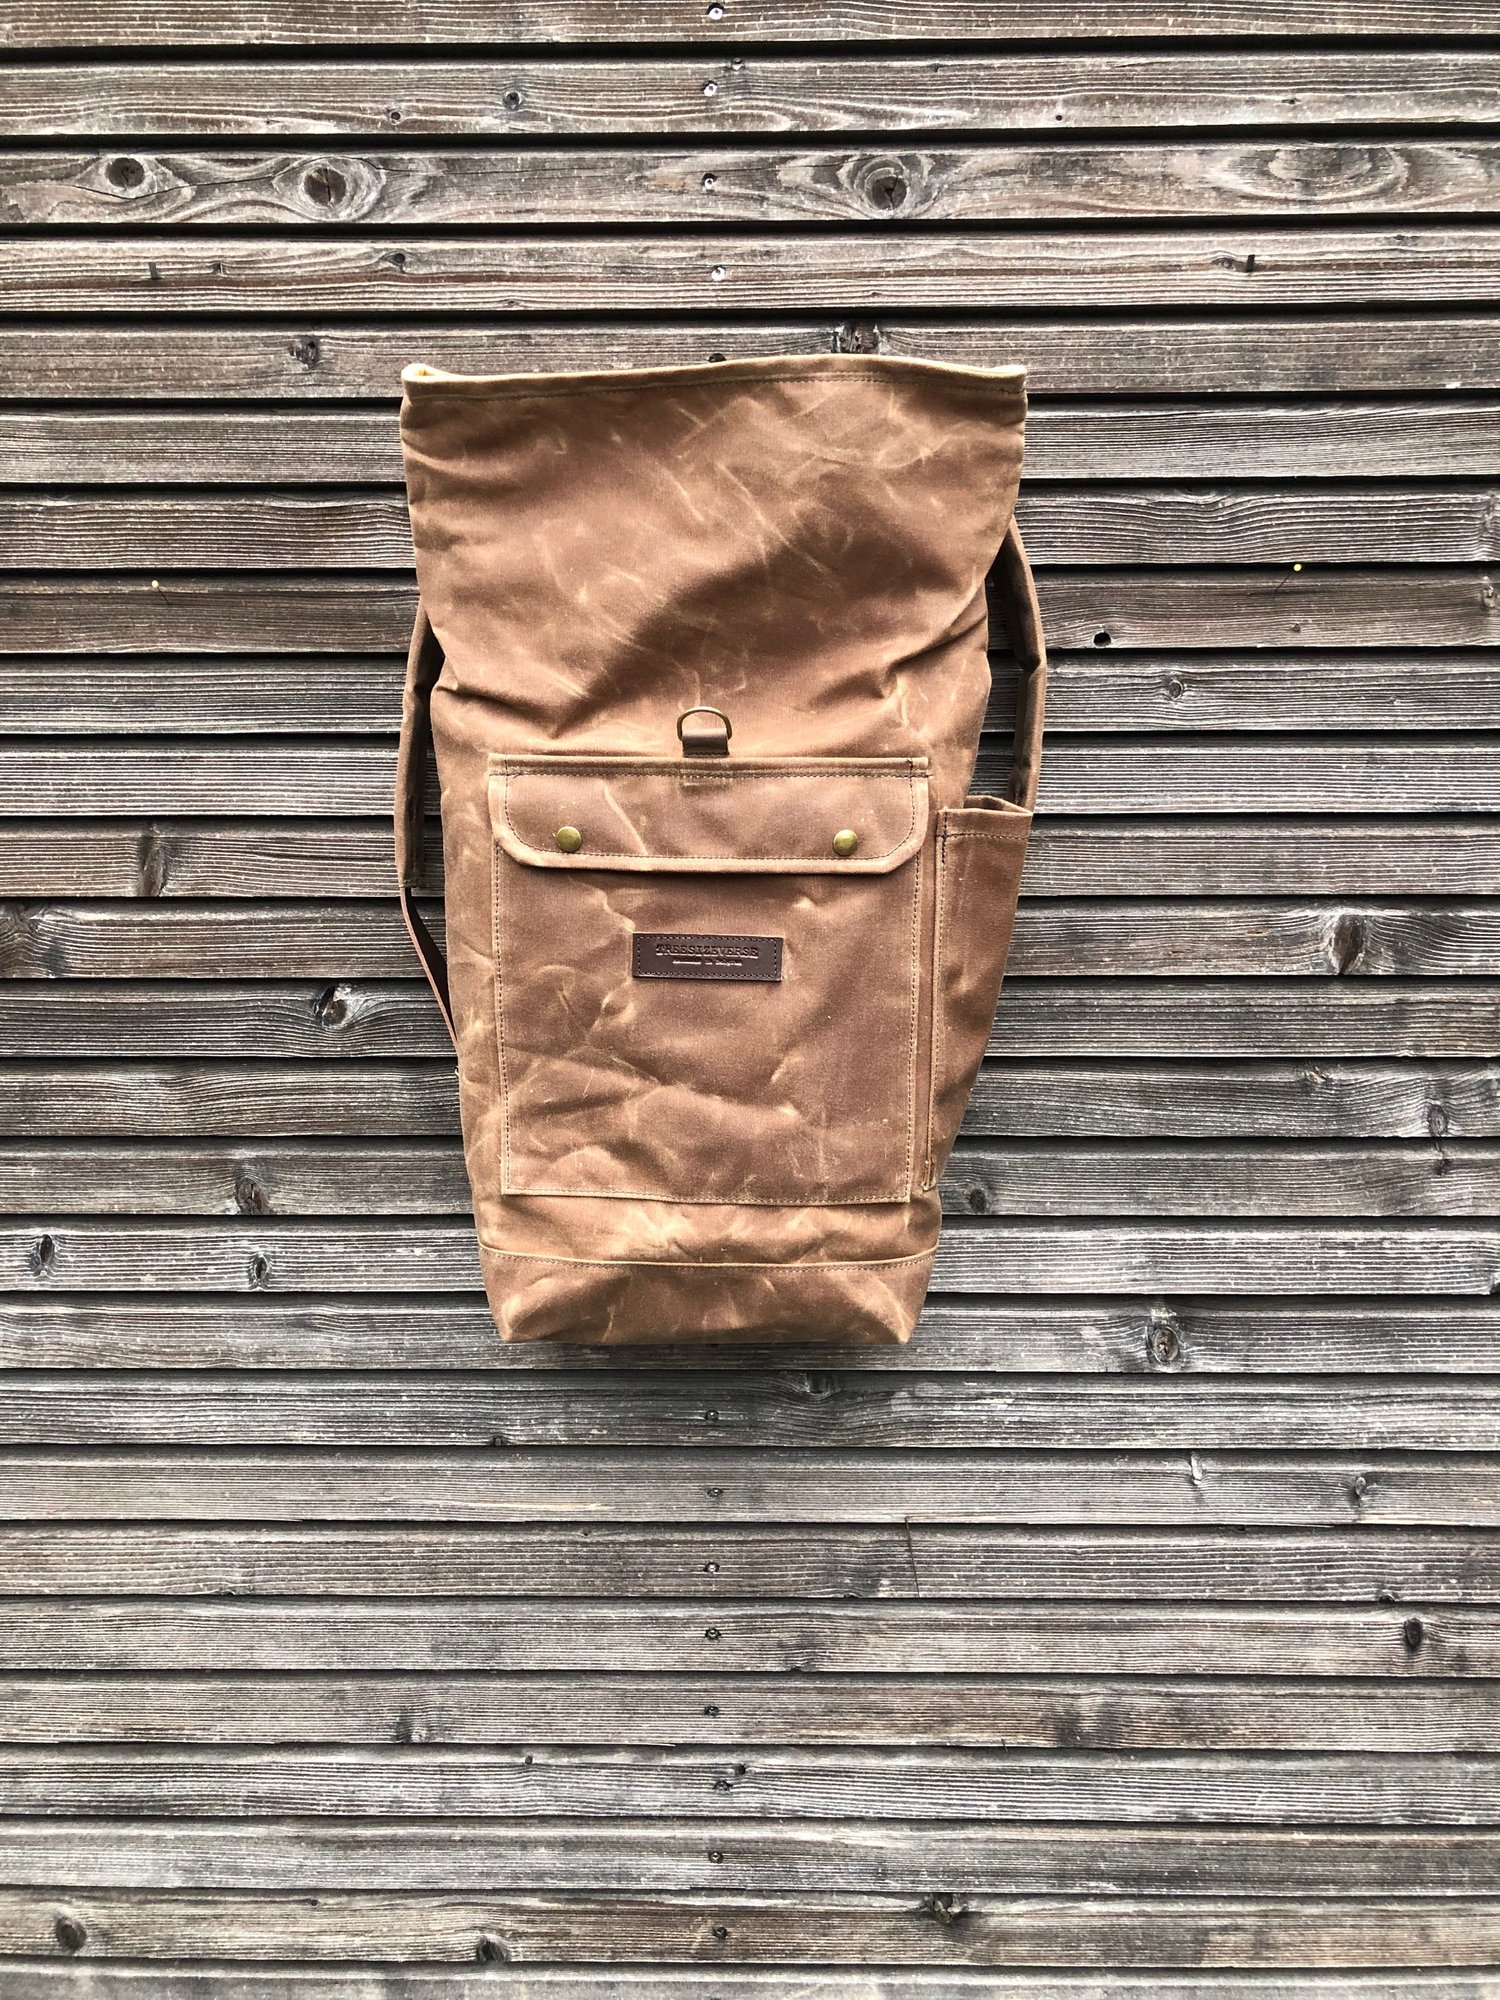 Image of Waxed canvas rucksack / waterproof backpack with roll up top and double waxed bottom